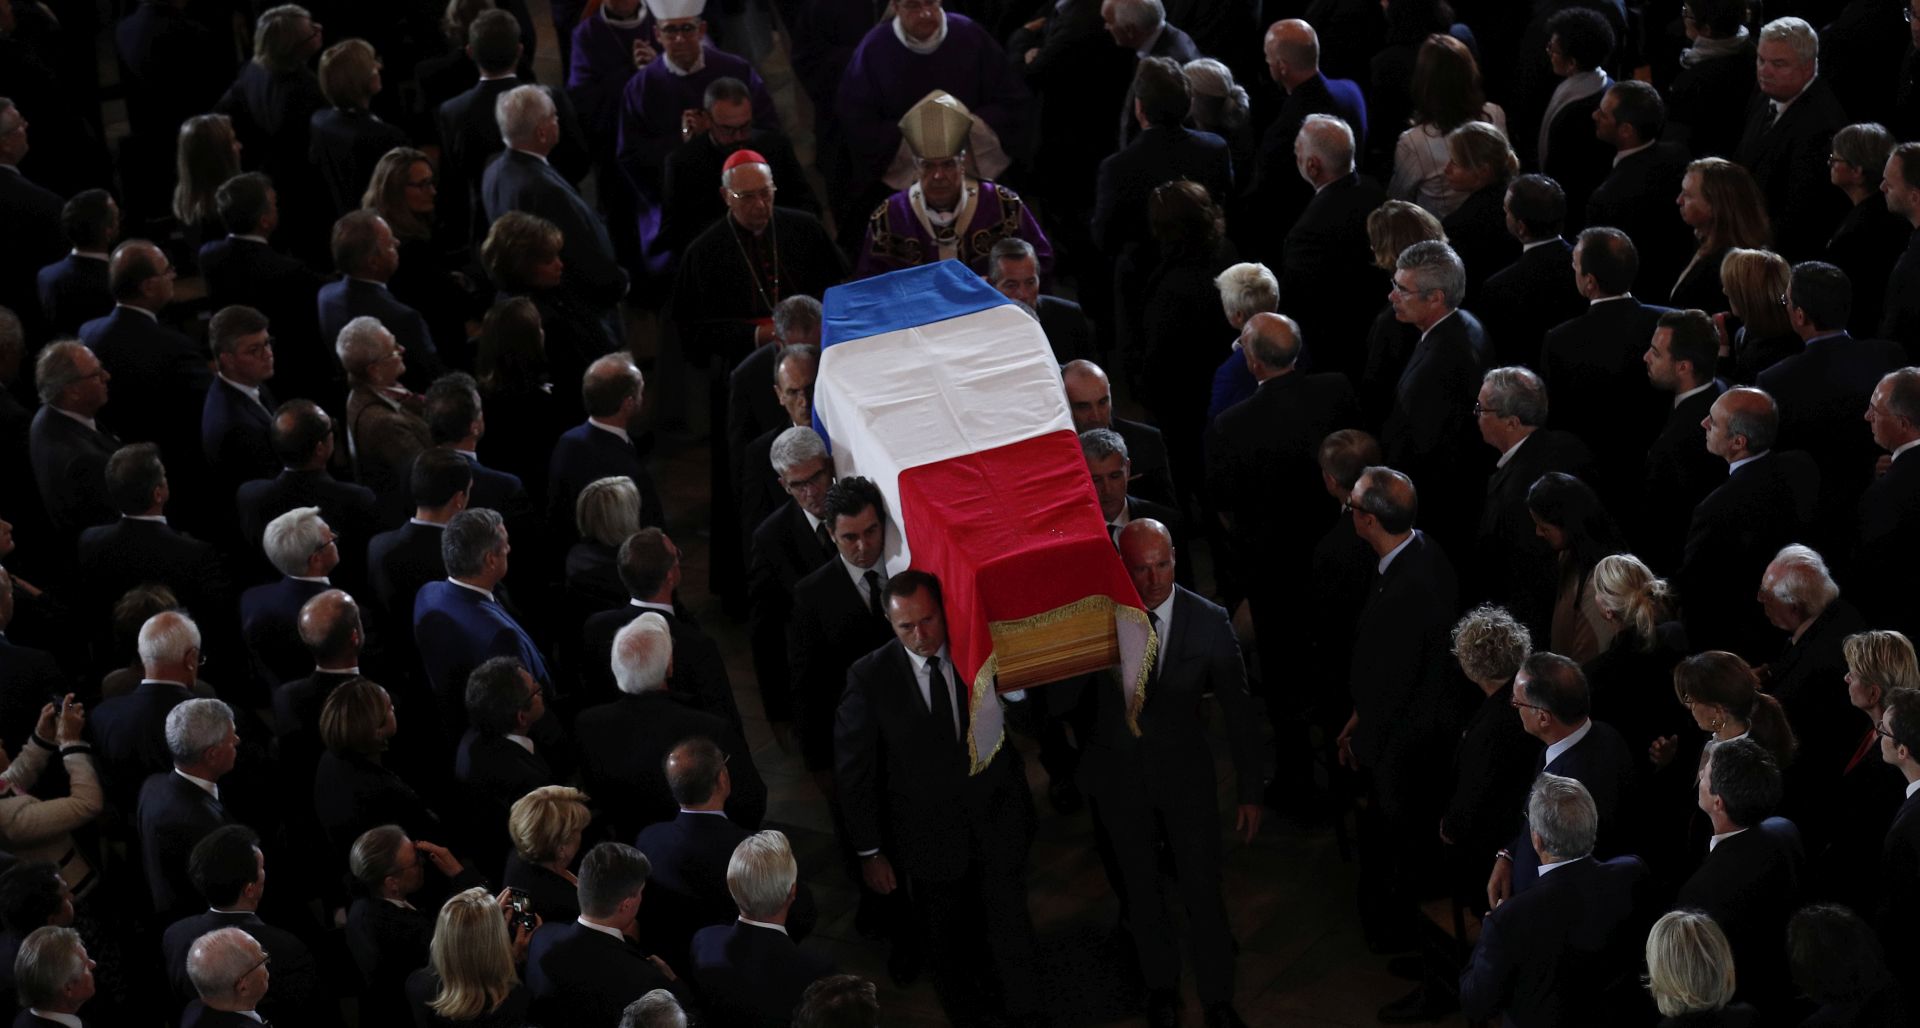 epa07882078 The coffin of late French President Jacques Chirac is carried out of Saint Sulpice church after his final service in Paris, France, 30 September 2019. Former French President Jacques Chirac was given full military honors on the day as past and current world leaders gathered in Paris to attend his final service.  EPA/FRANCOIS MORI / POOL  MAXPPP OUT